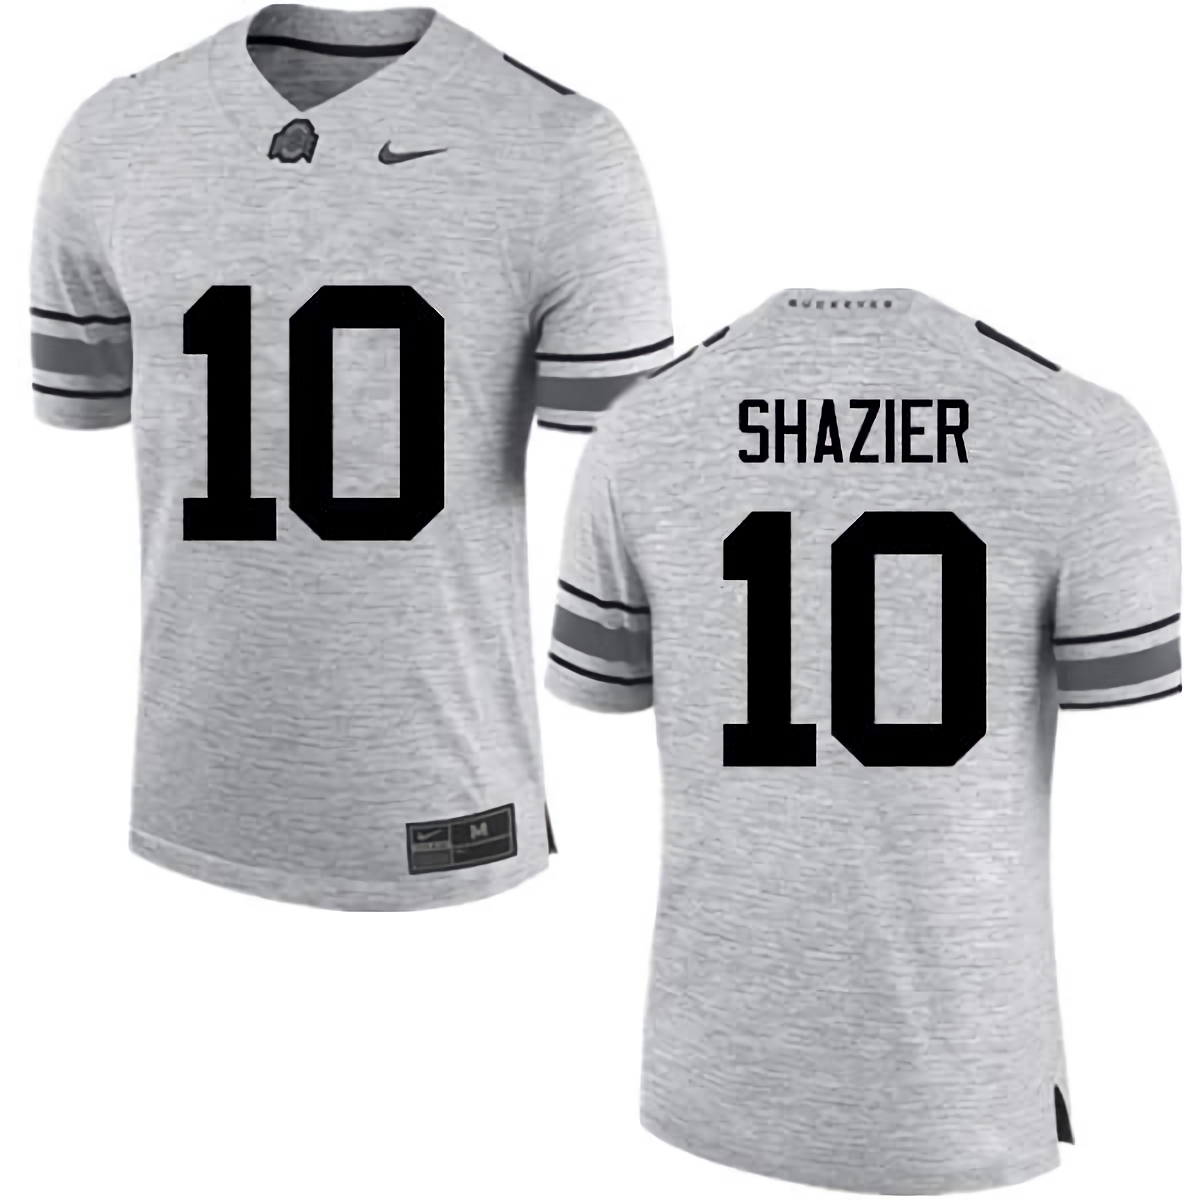 Ryan Shazier Ohio State Buckeyes Men's NCAA #10 Nike Gray College Stitched Football Jersey NKL4056IS